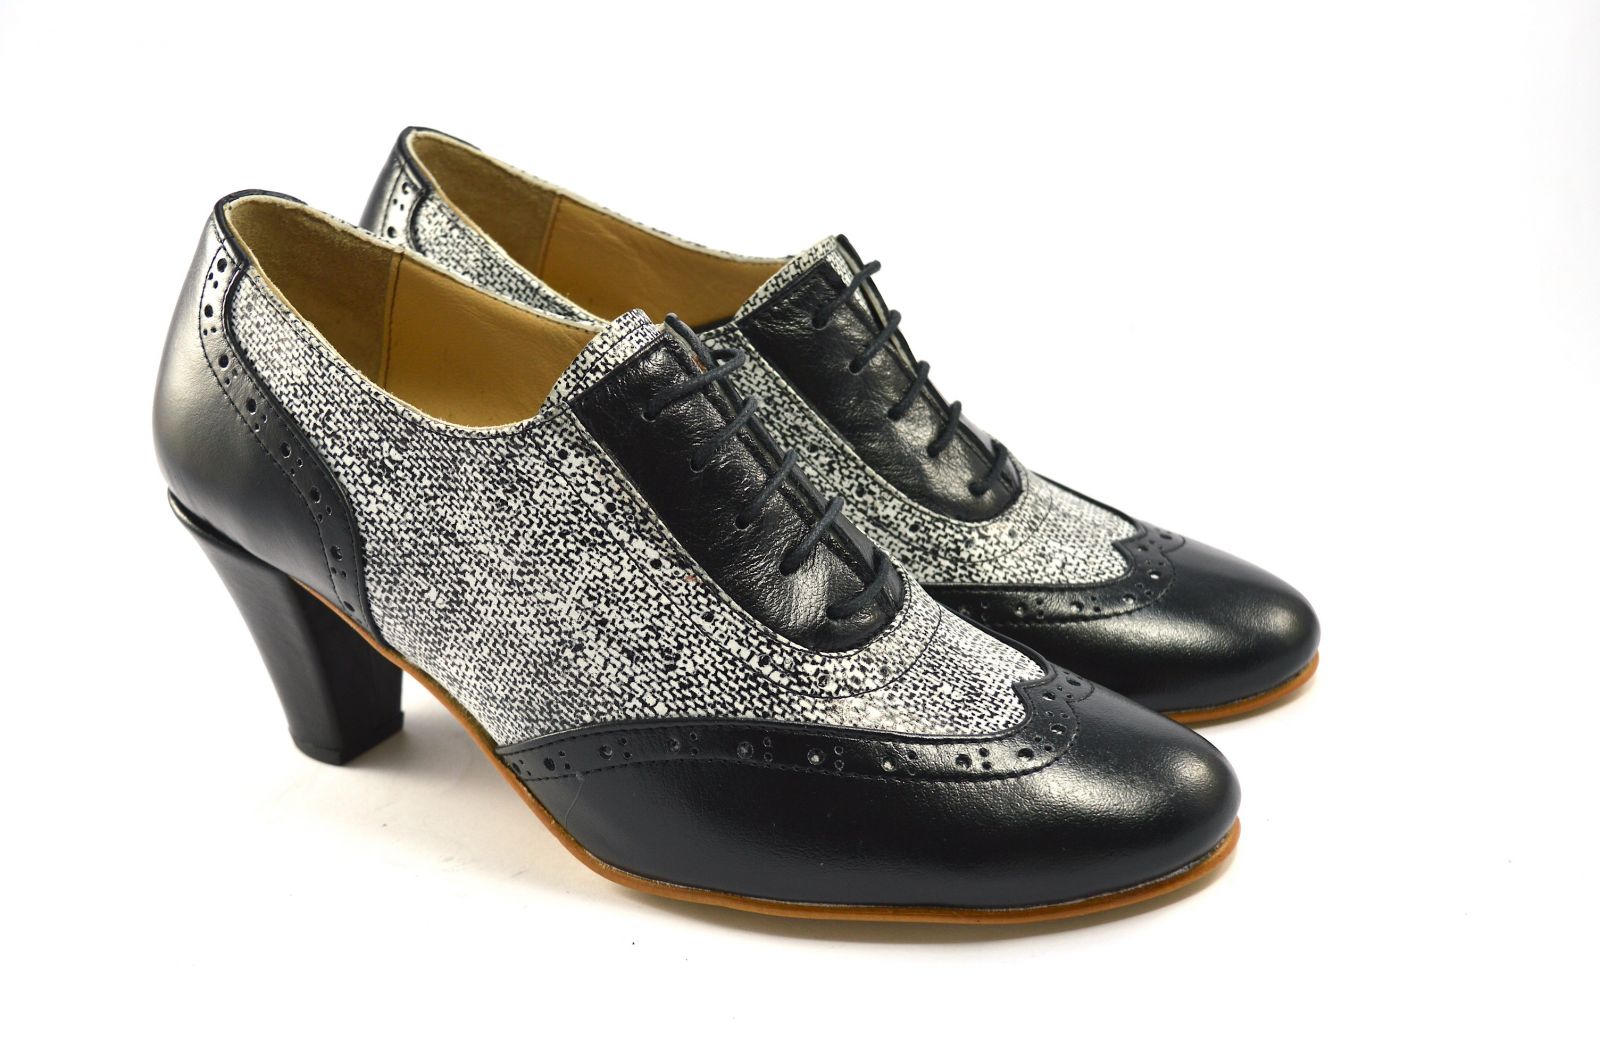 Women's Argentine Tango Shoe, oxford style, by soft black leather